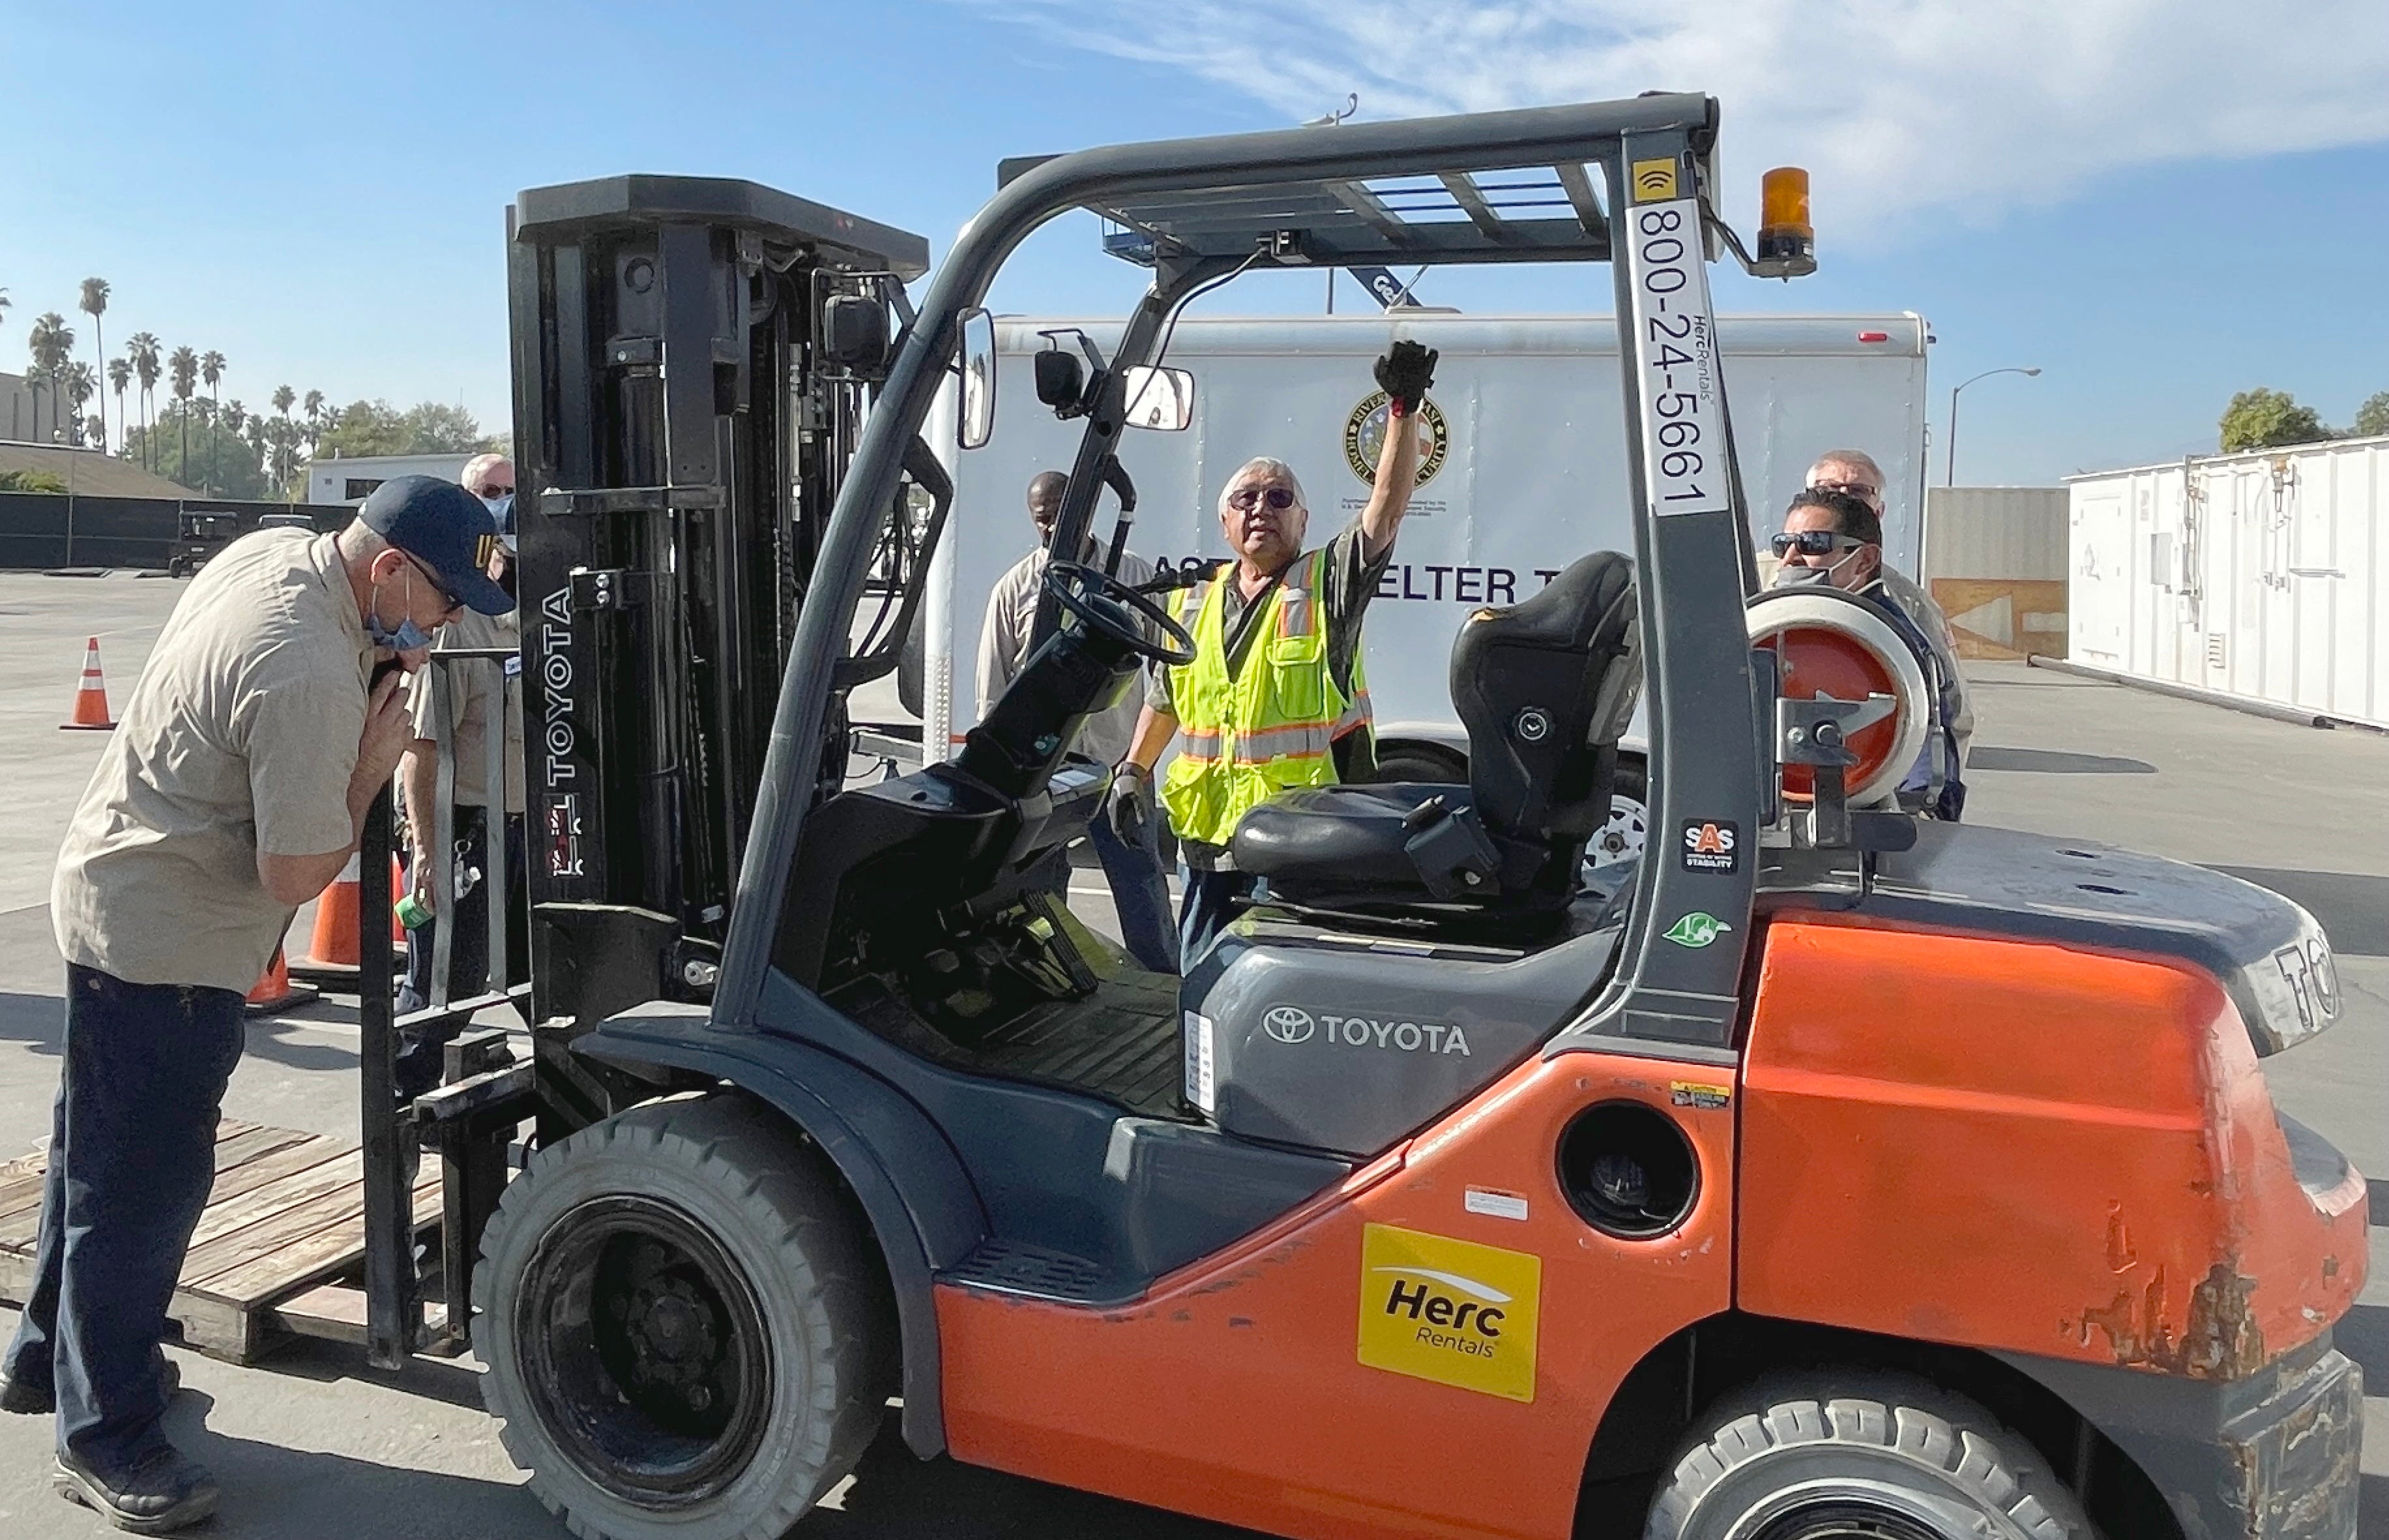 Instructor pointing to parts of a forklift for hands-on training